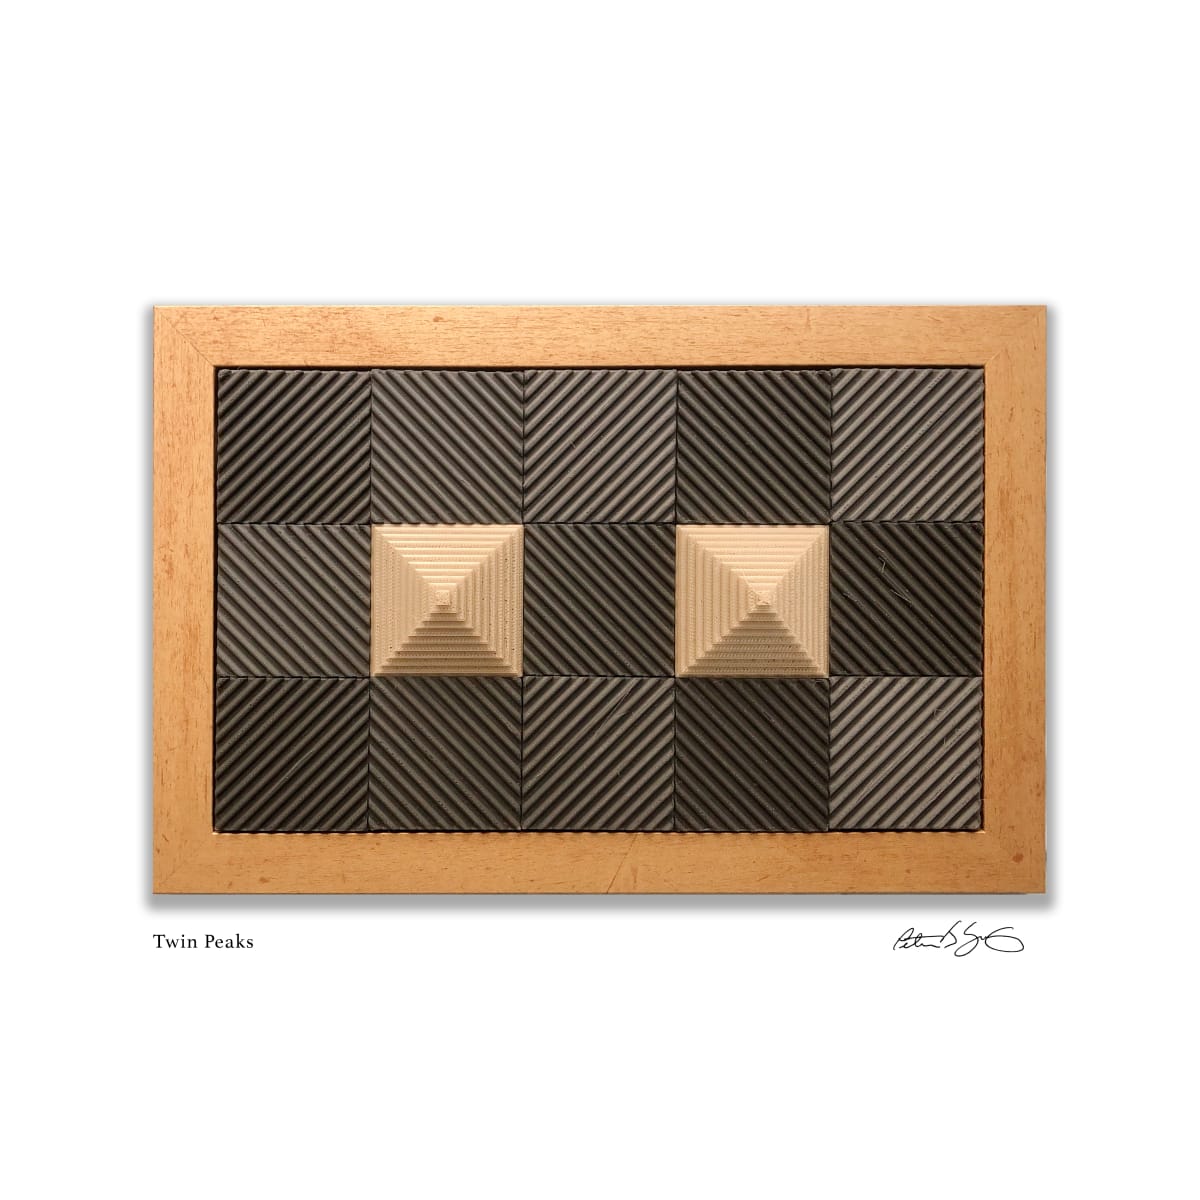 Twin Peaks by Peter J Sucy Digital Arts  Image: Gold step pyramids surrounded by dark gray diagonal lined tiles.